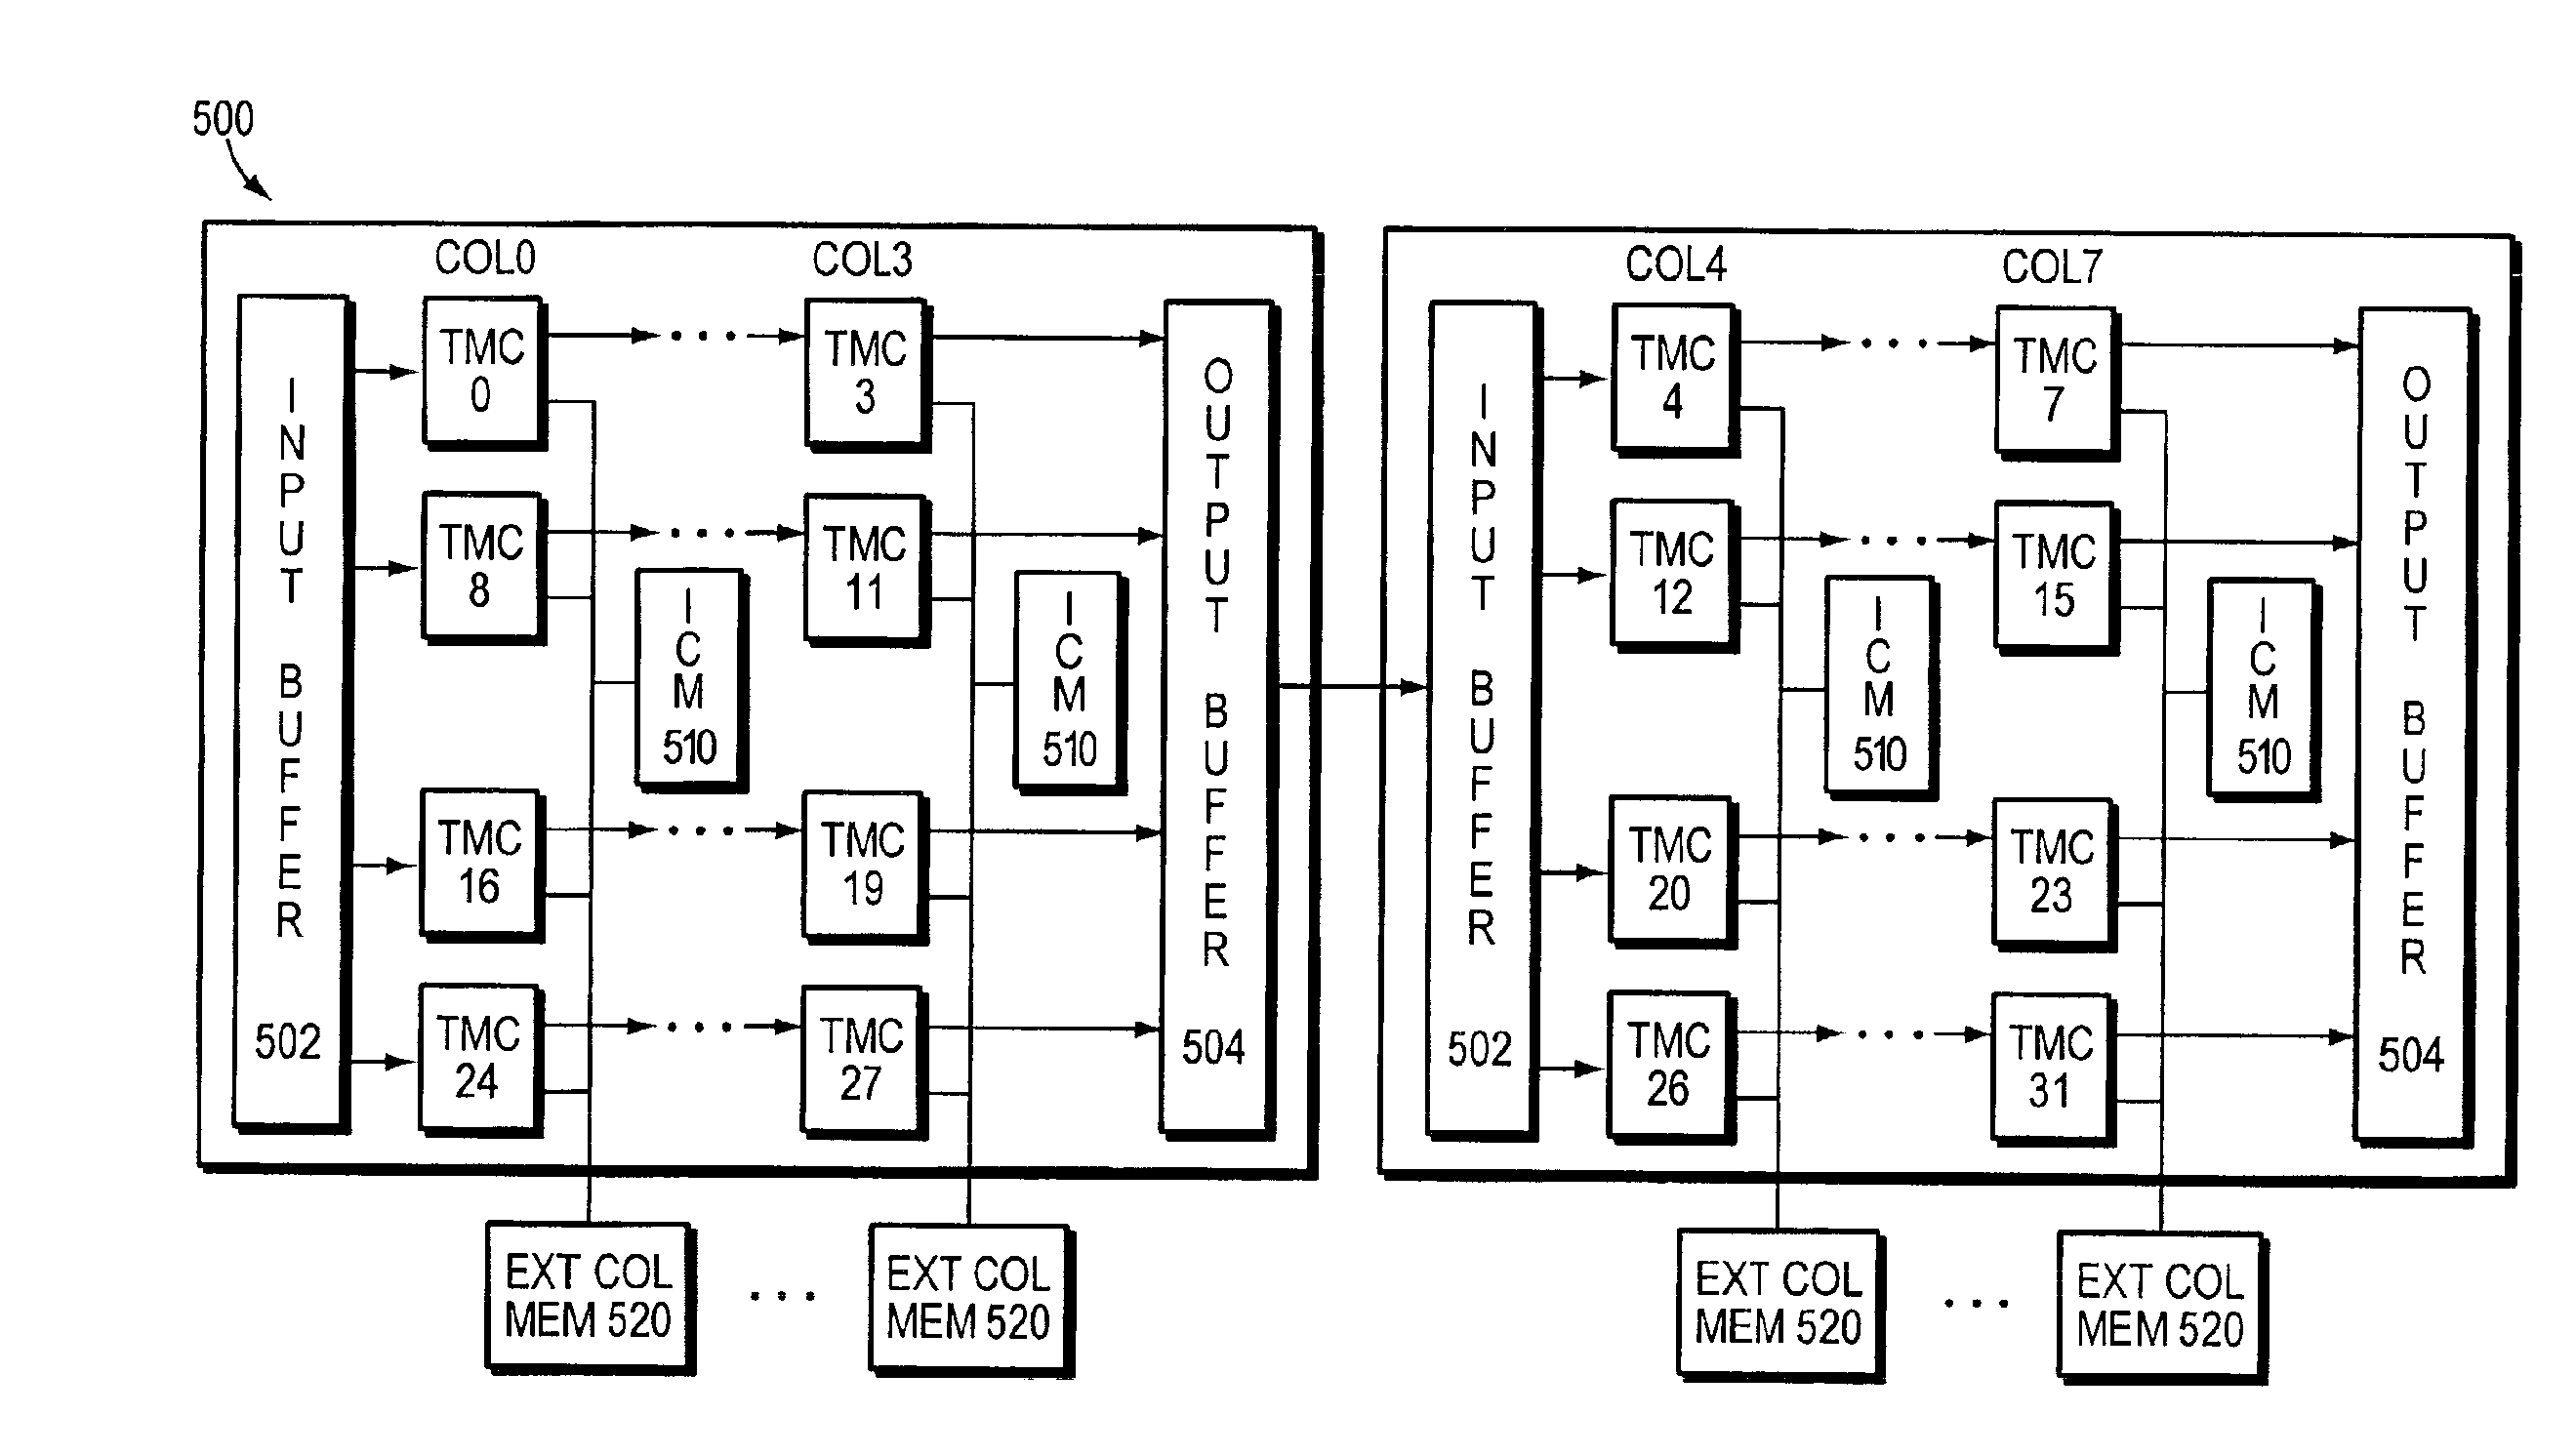 Coherent access to and update of configuration information in multiprocessor environment